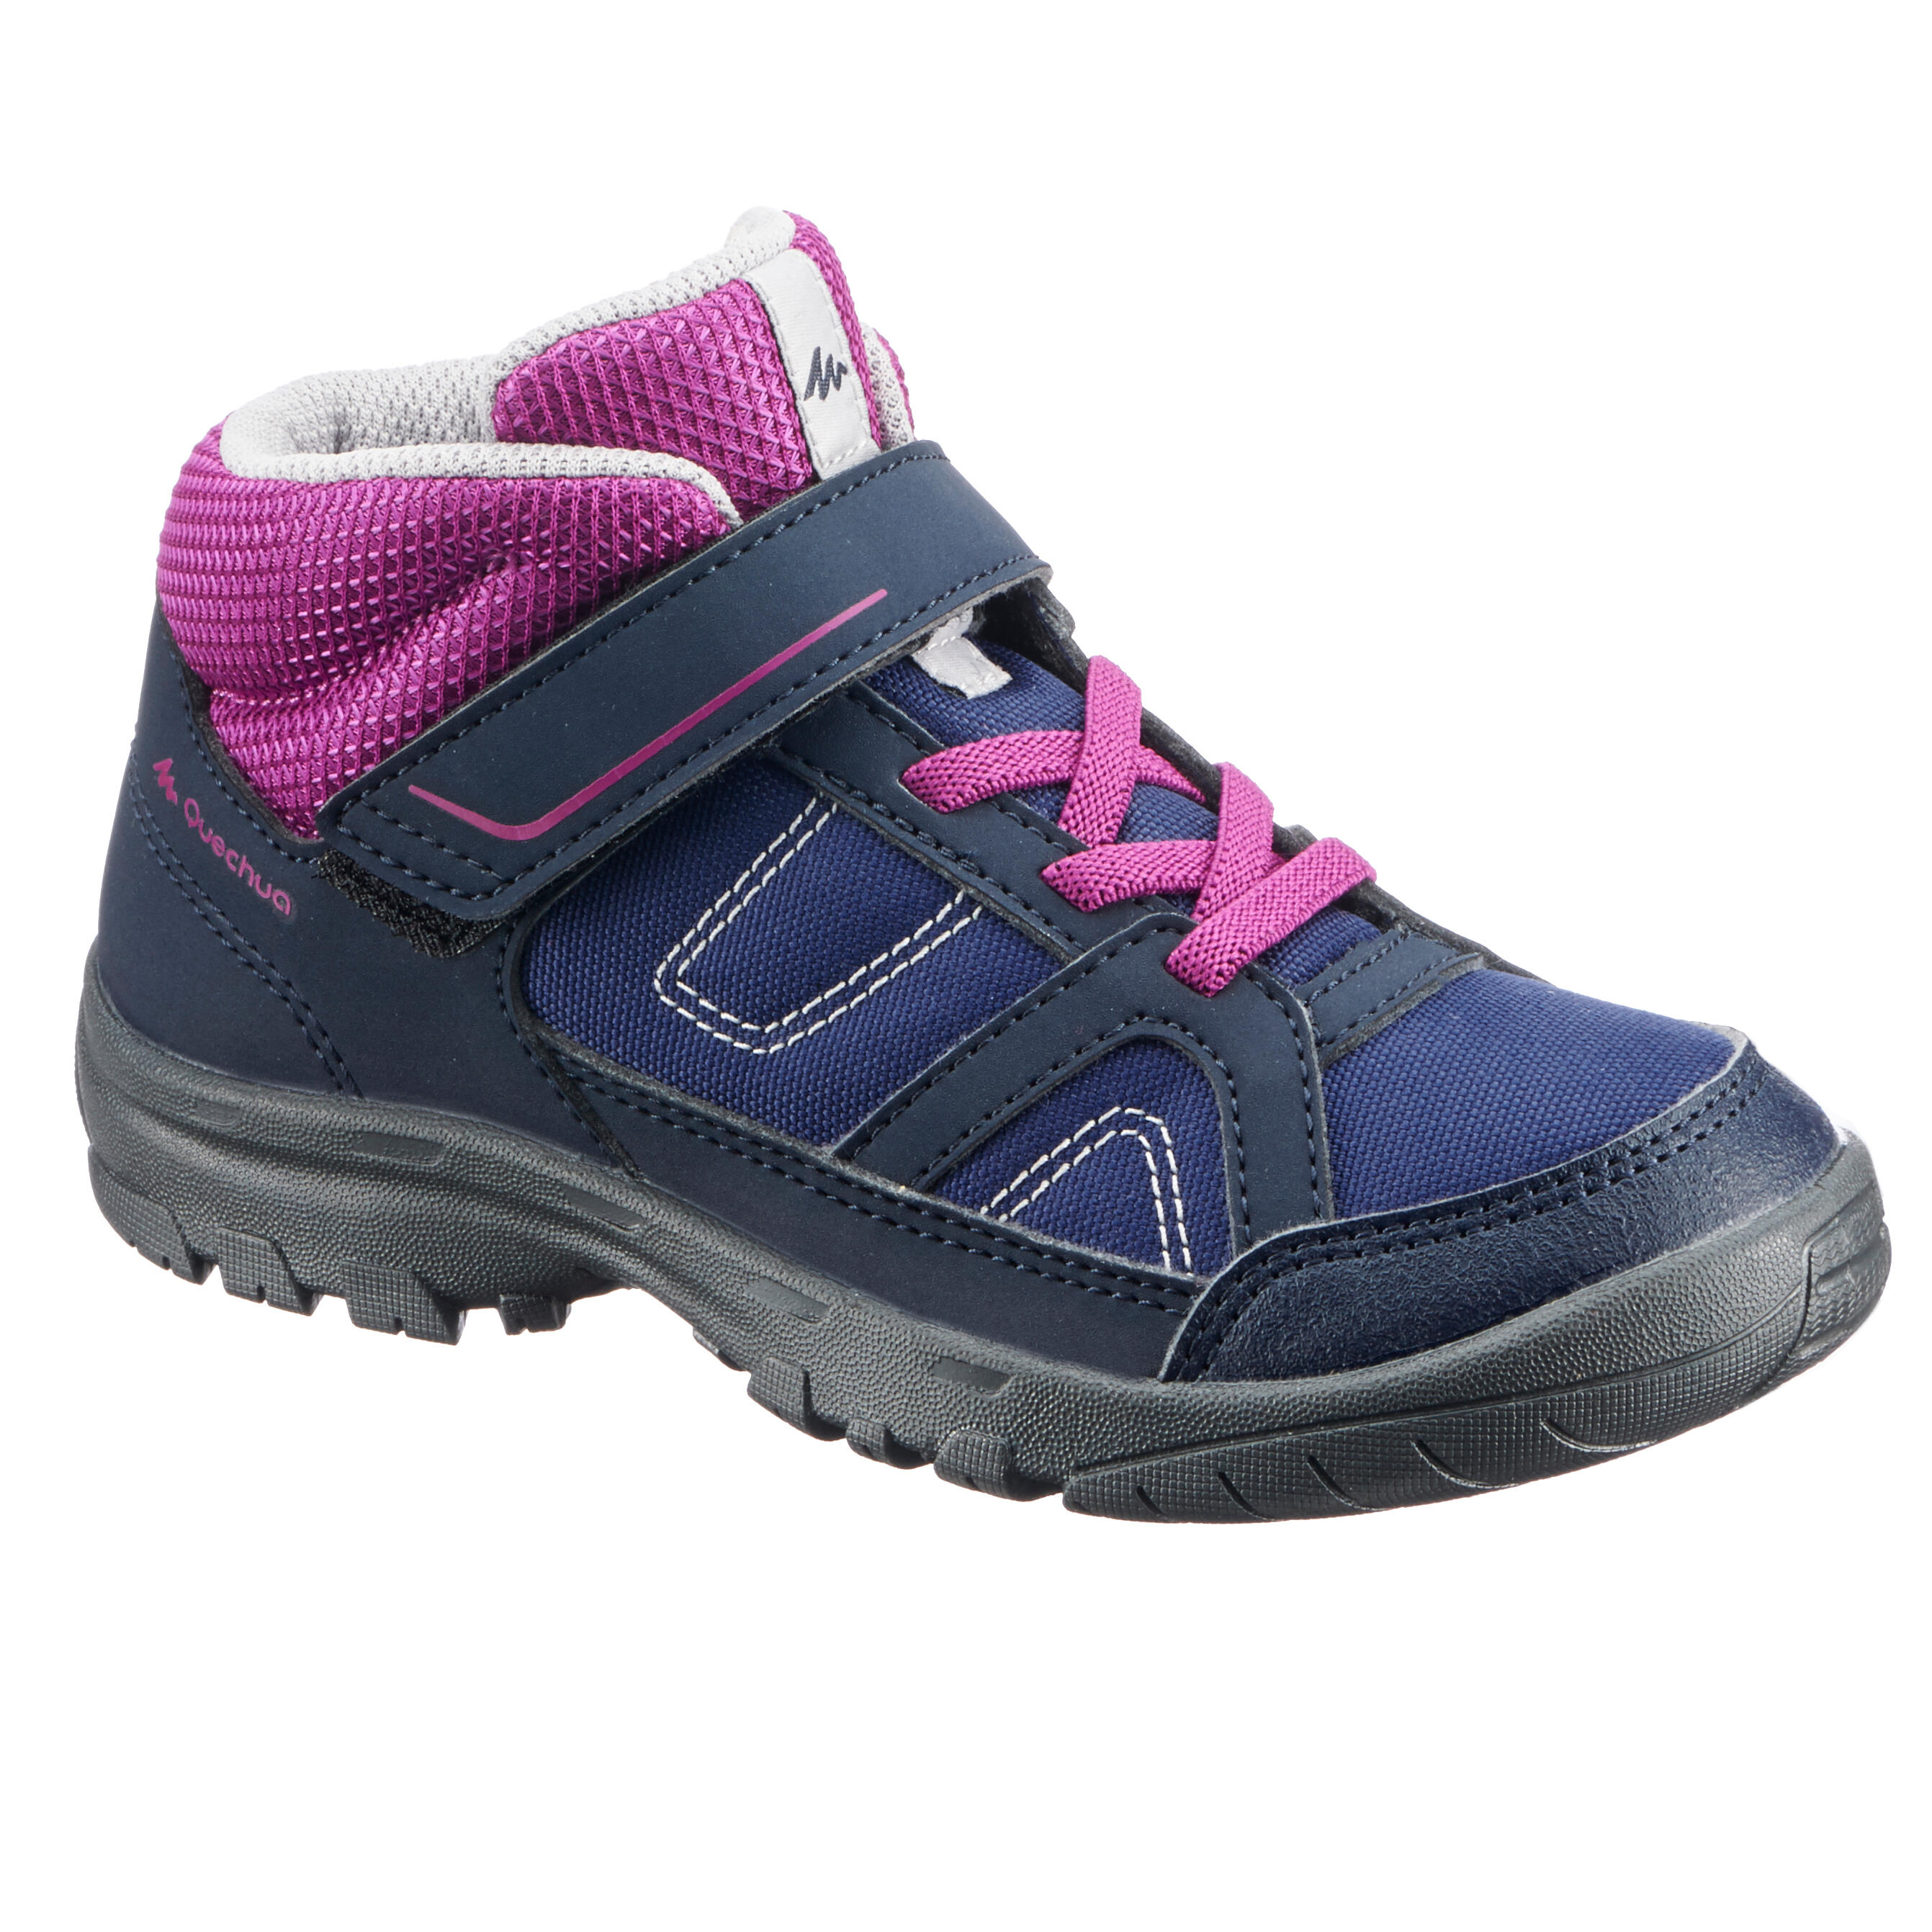 QUECHUA MH100 Mid Kid Kids' High Hiking Boots Sizes Infant 7 to Kids 2 - Blue/Purple